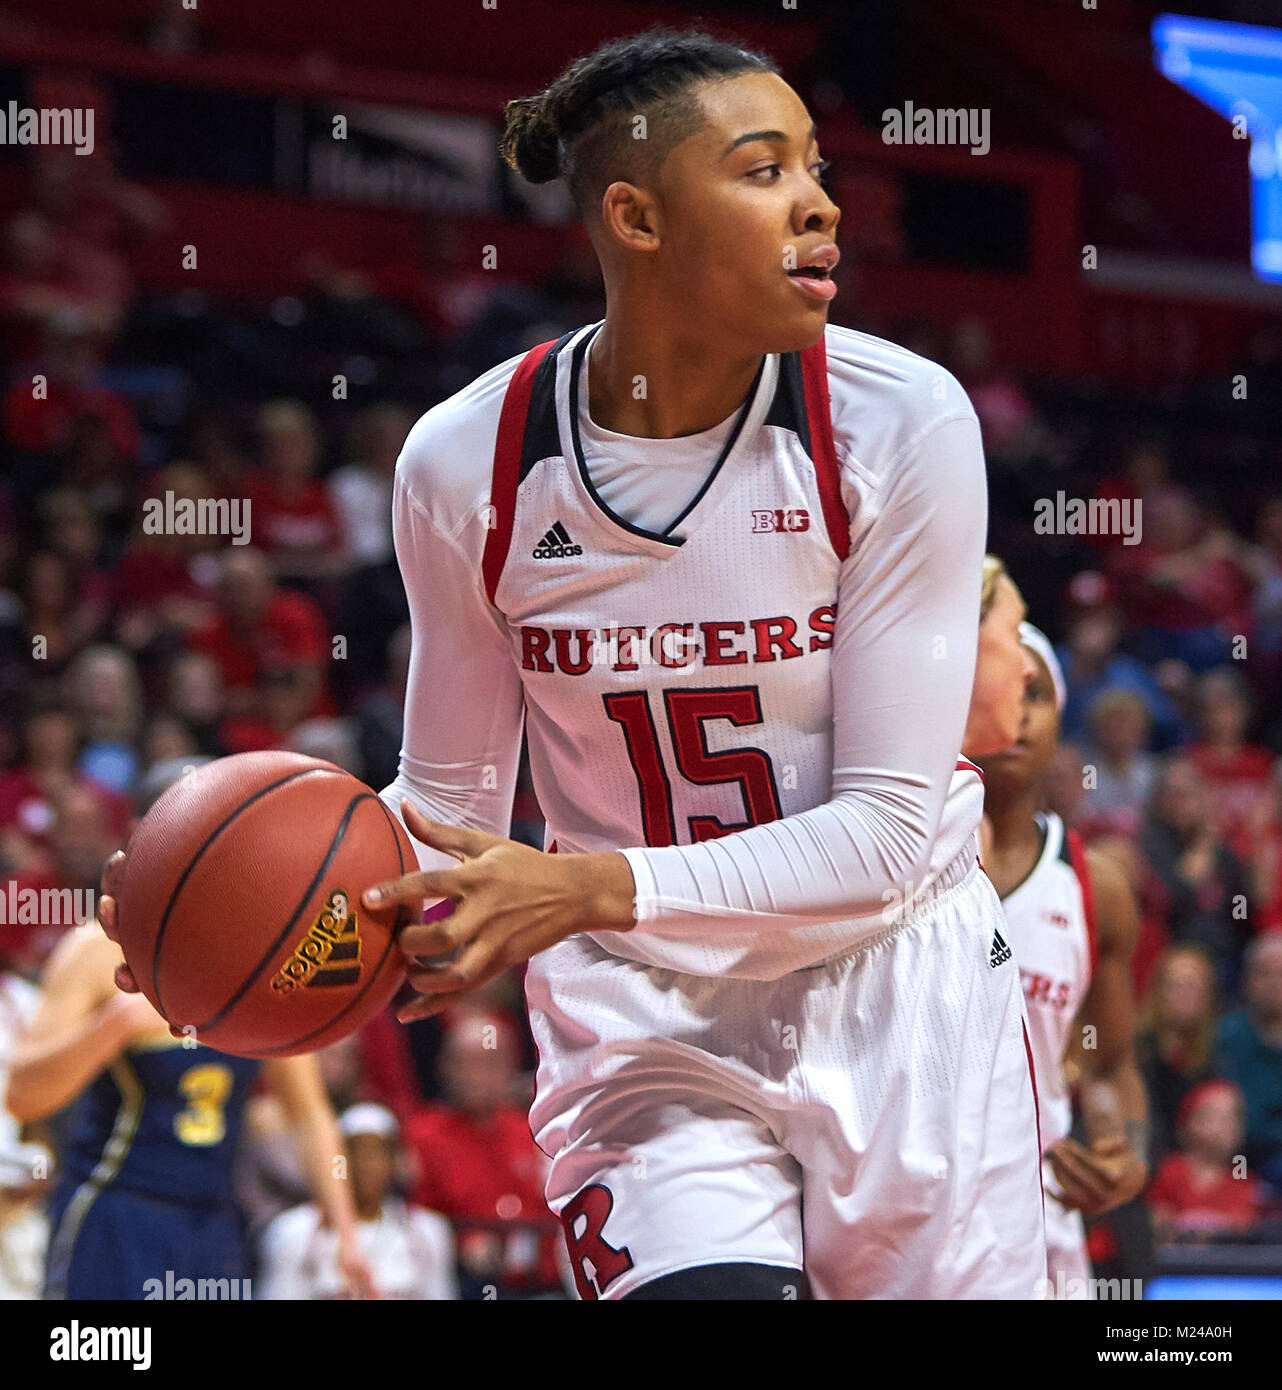 Piscataway, New Jersey, USA. 4th Feb, 2018. Rutgers Scarlet Knights center Caitlin  Jenkins (15) grabs a rebound in the first half at Rutgers Athletic Center  in Piscataway, New Jersey. Rutgers defeats #18Michigan